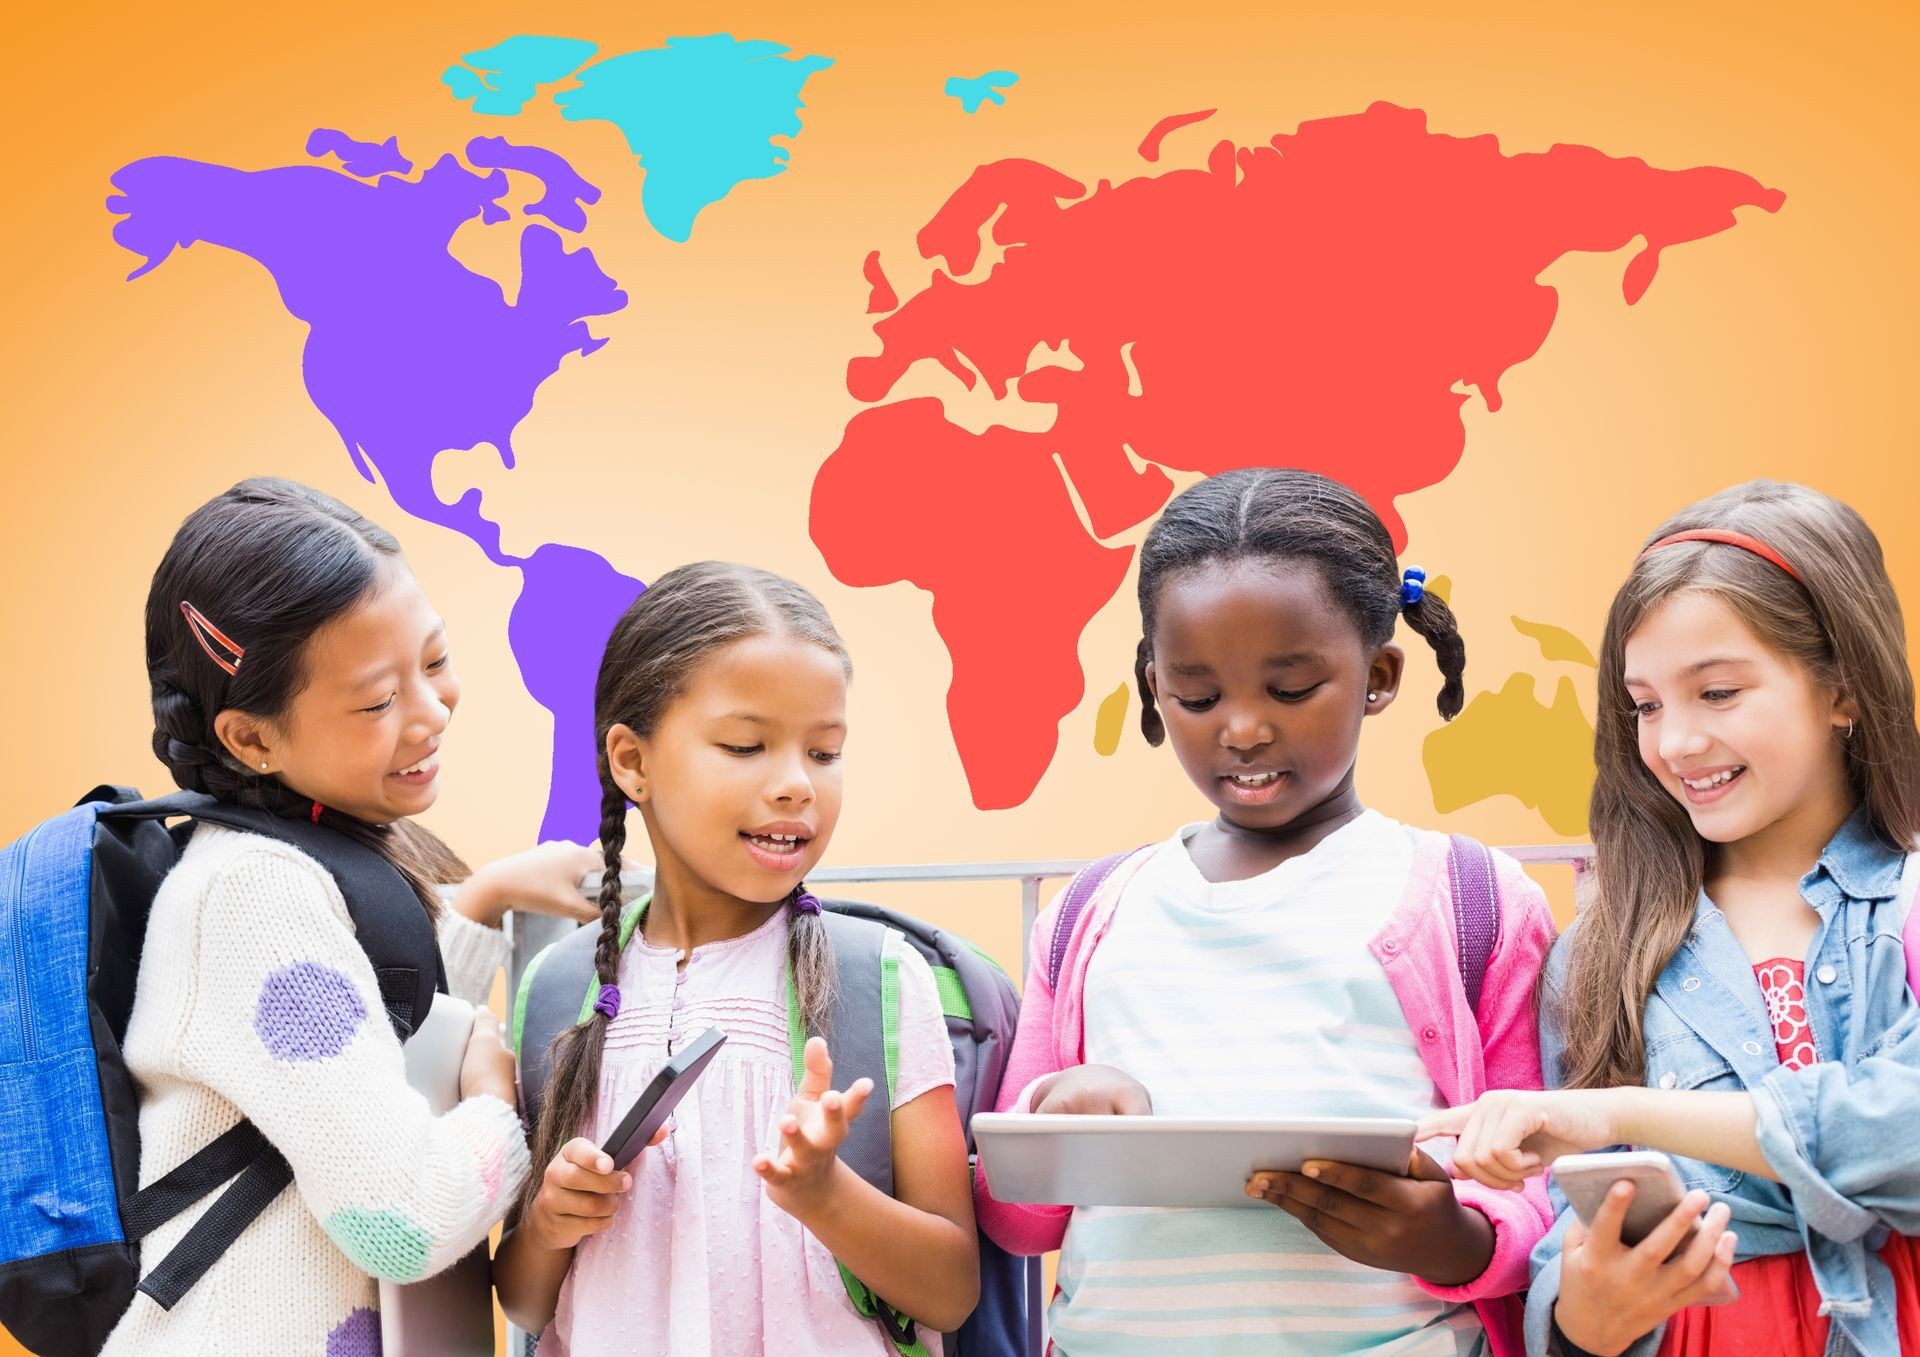 Digital composite of Multicultural Kids on devices in front of colorful world map